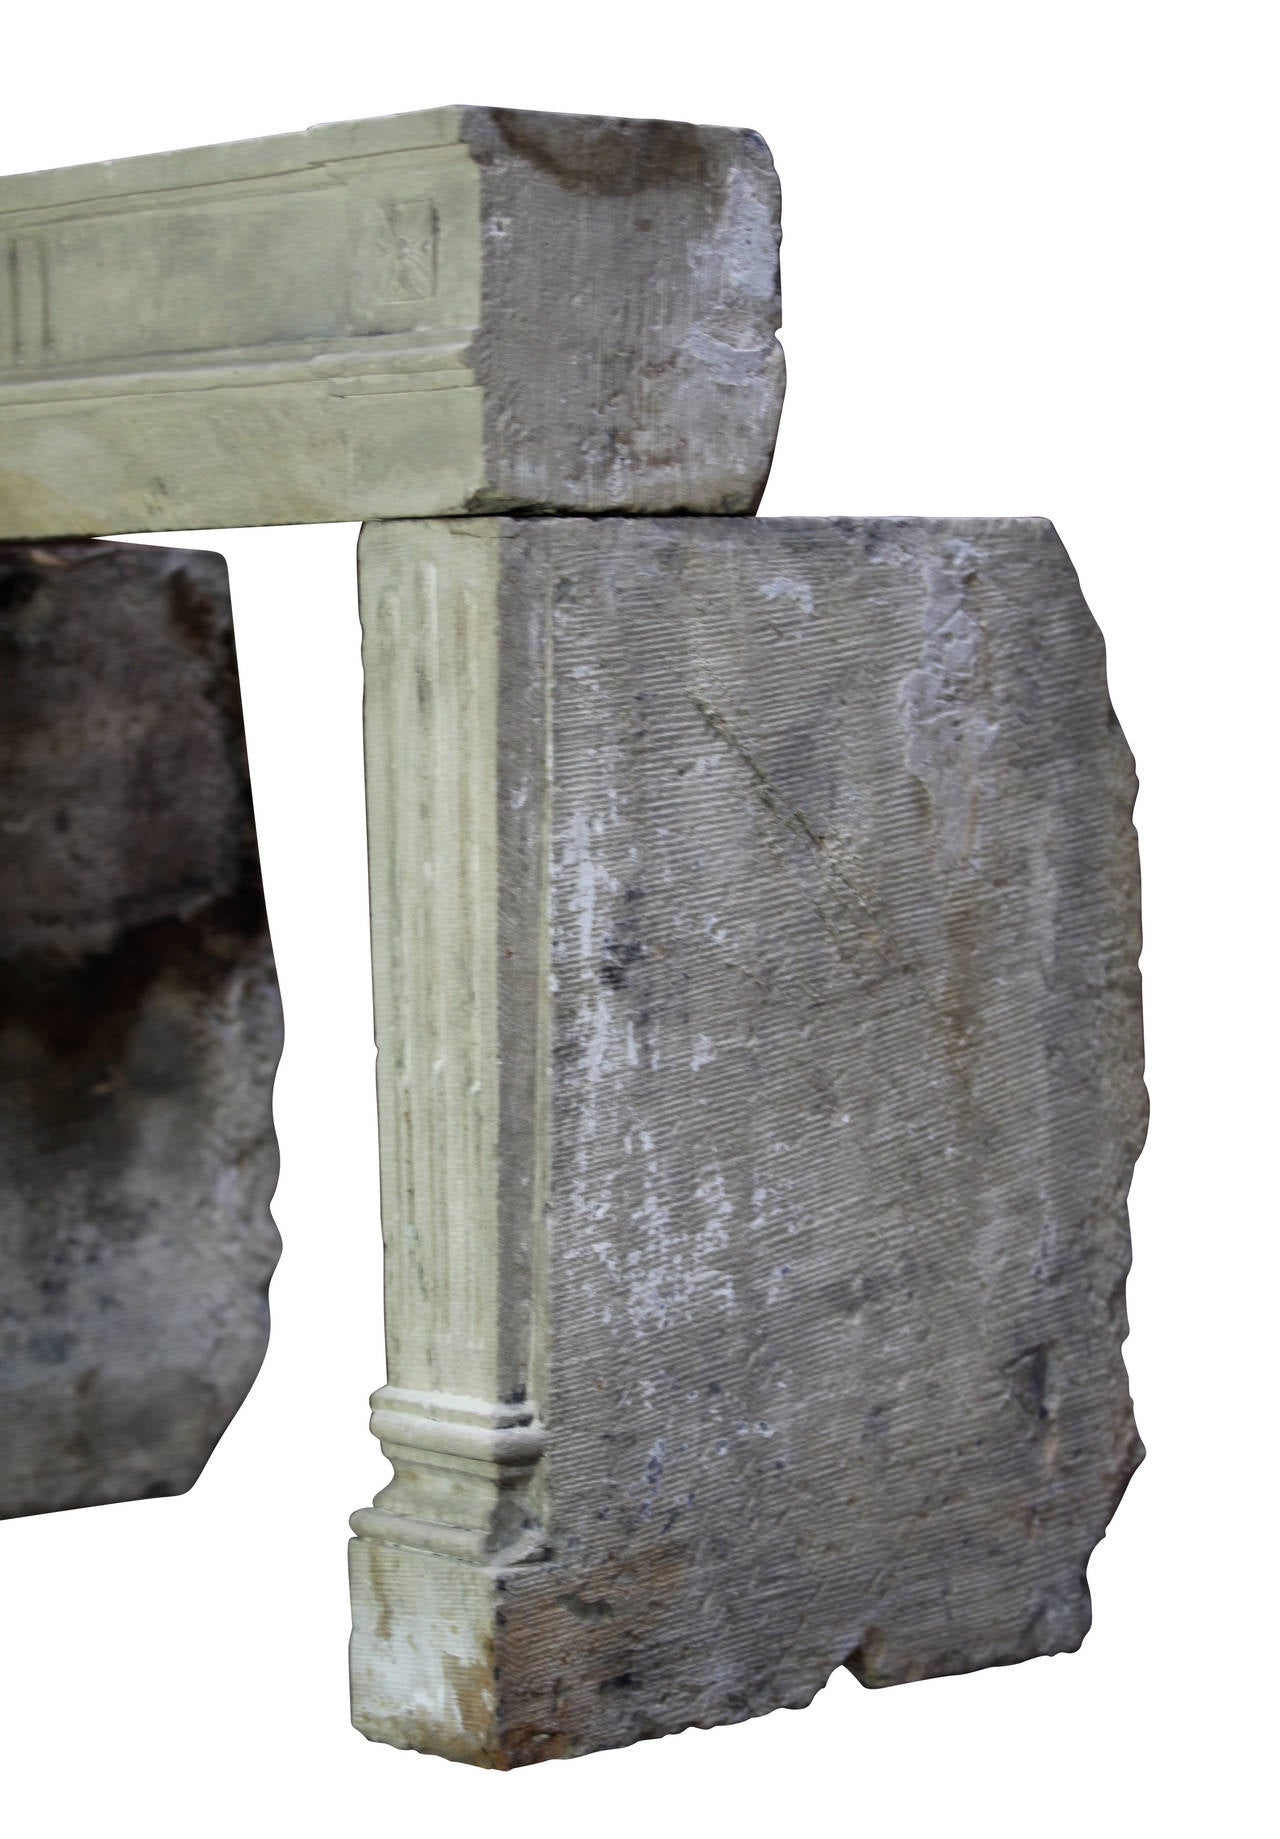 This 18th century Grez stone fireplace mantel (fireplace) with remains of the polychrome and original patina consists of 3 solid blocks. This mantel is from the Louis XVI period. It is perfect for a country style house or chalet in the mountains to